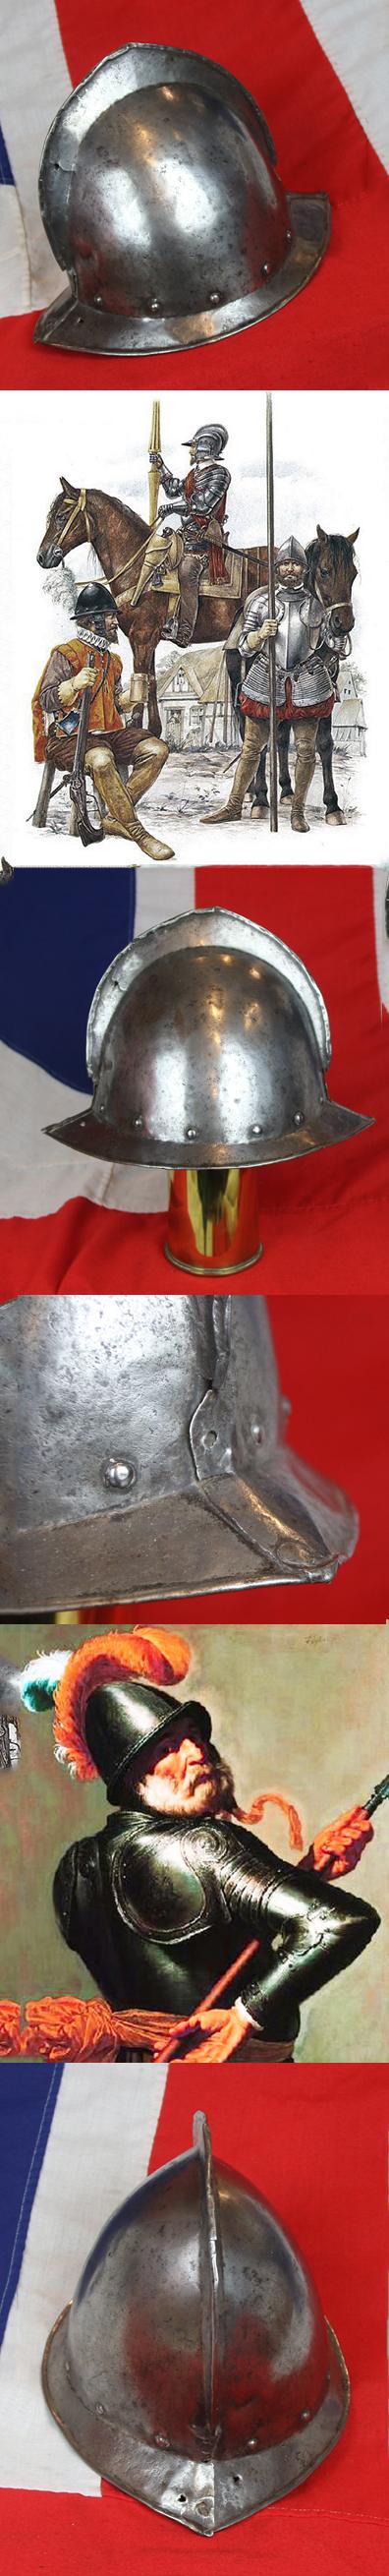 A Most Scarce, Original, Early 17th Century English Civil War Infantry Musketeer's or Pikeman's Comb Morion Helmet